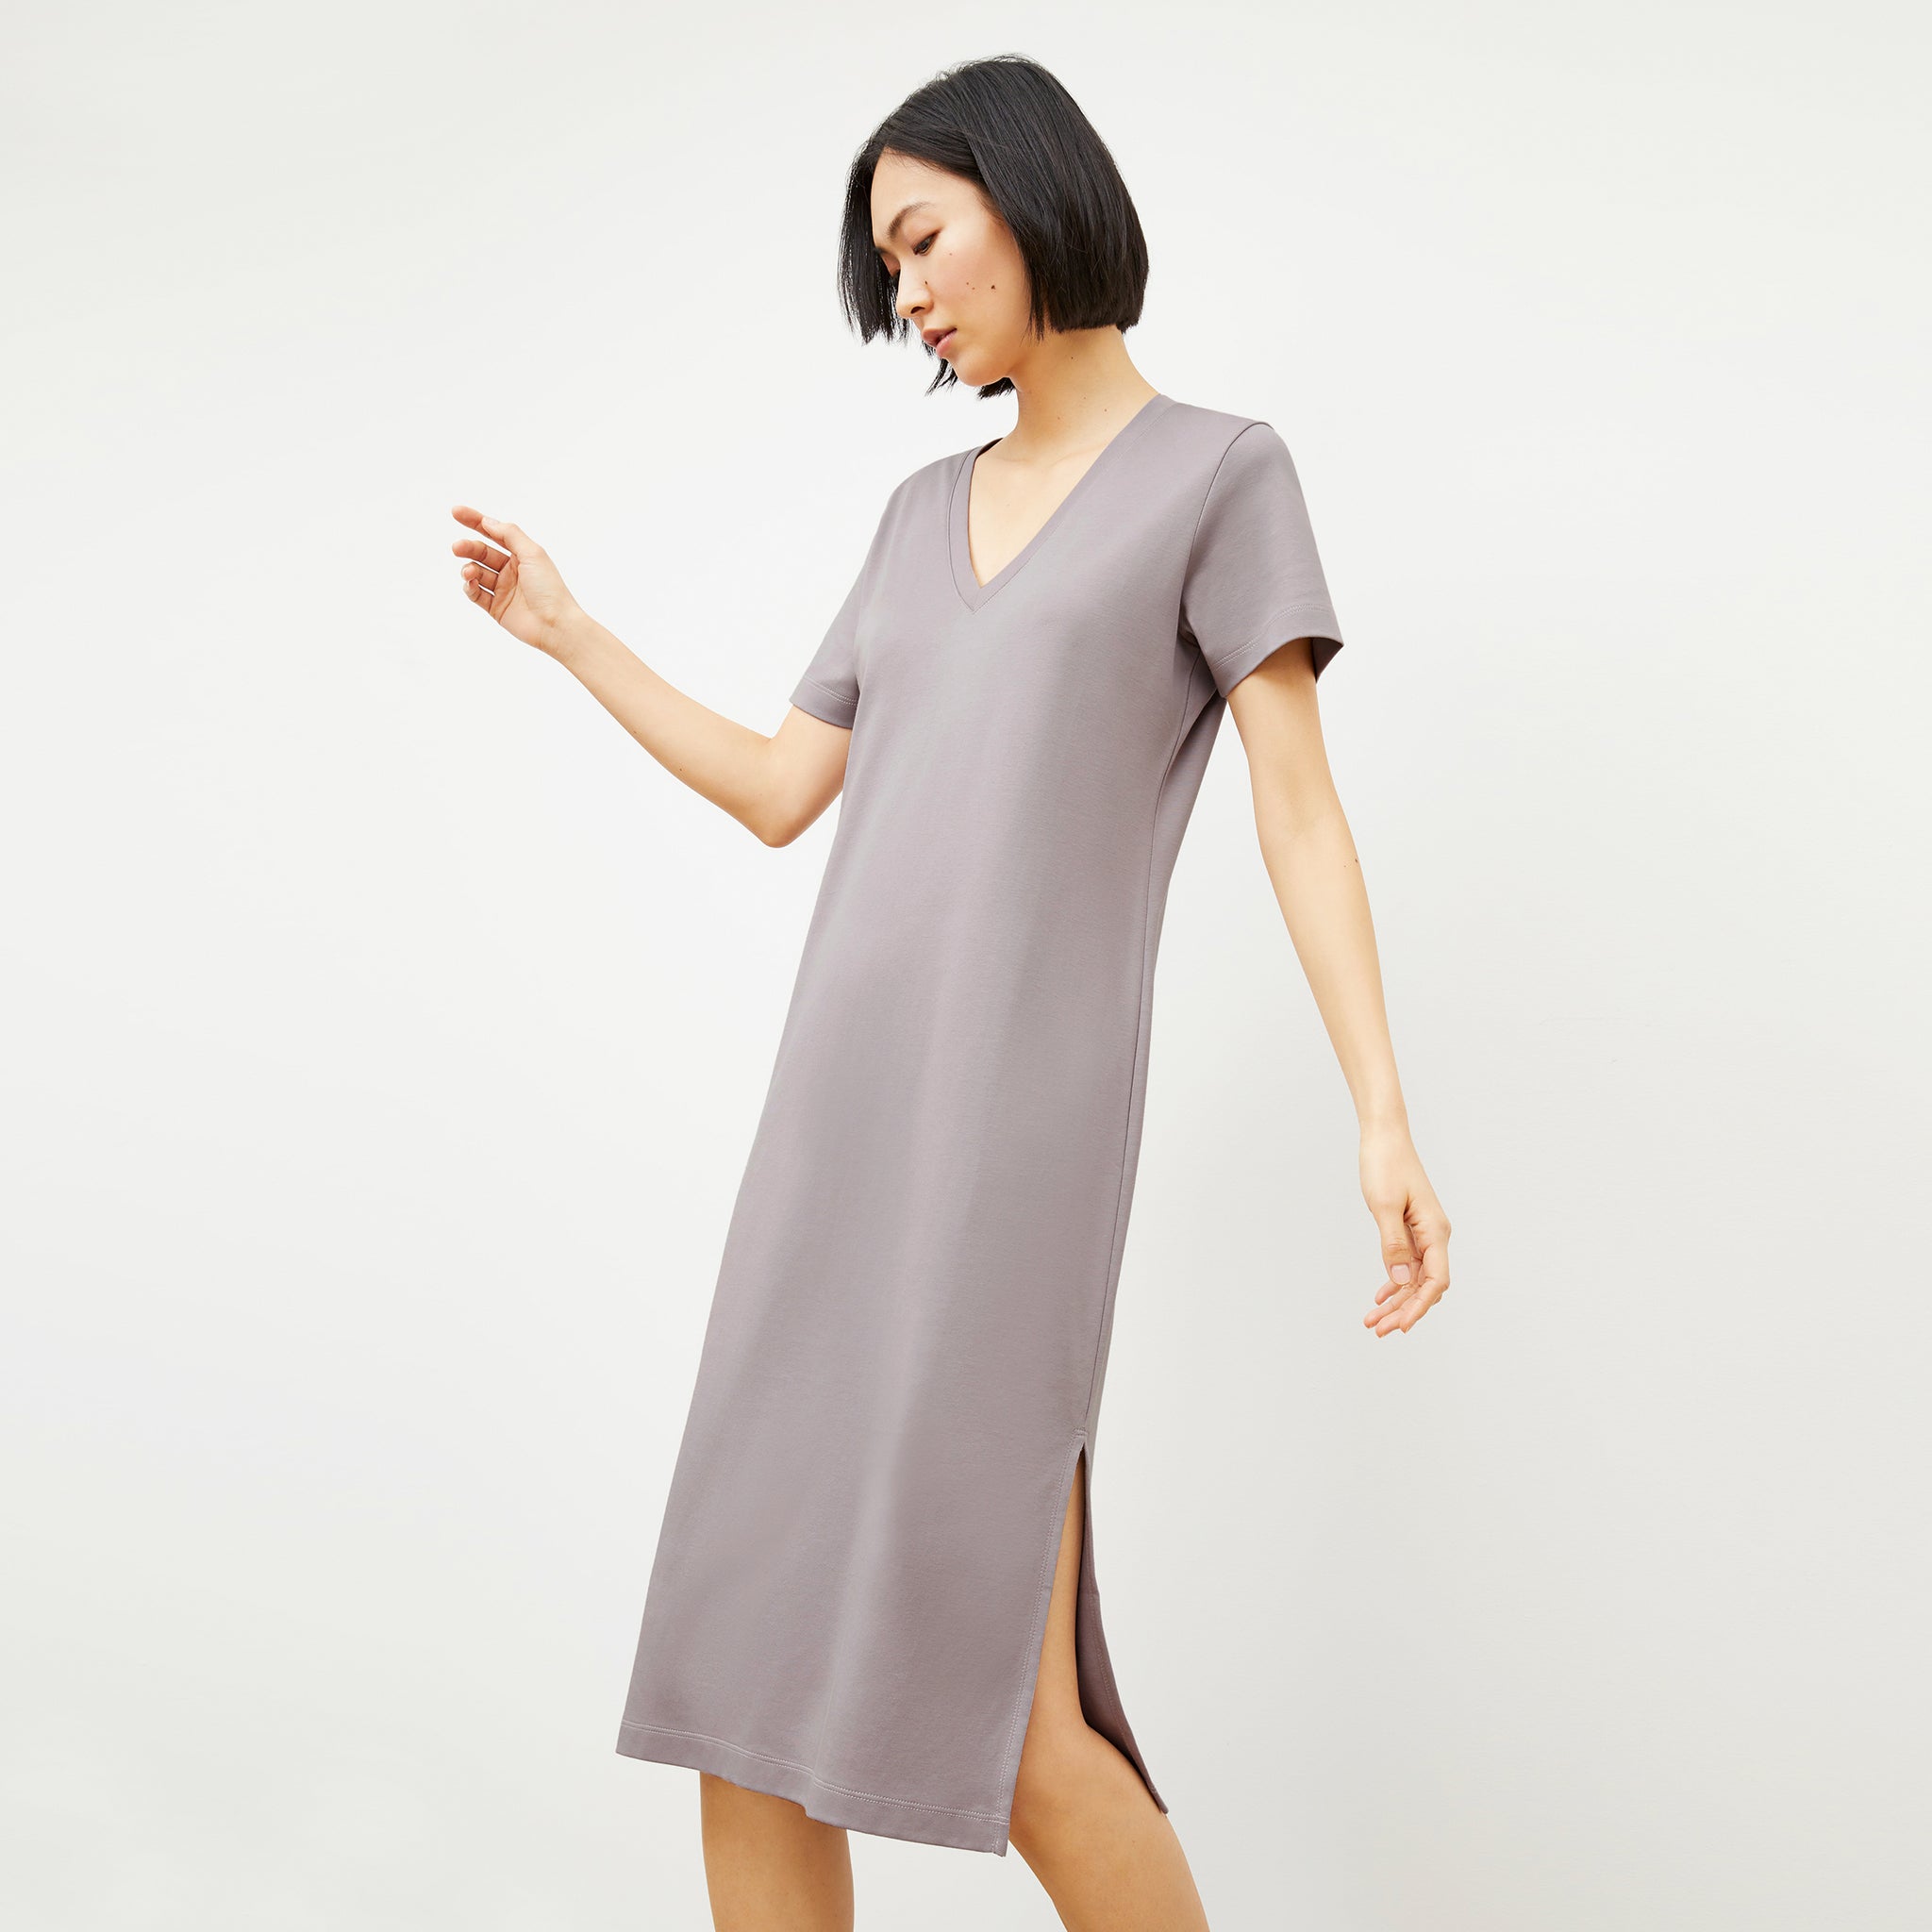 Side image of a woman wearing the Renee Dress - Pima Cotton in Wisteria